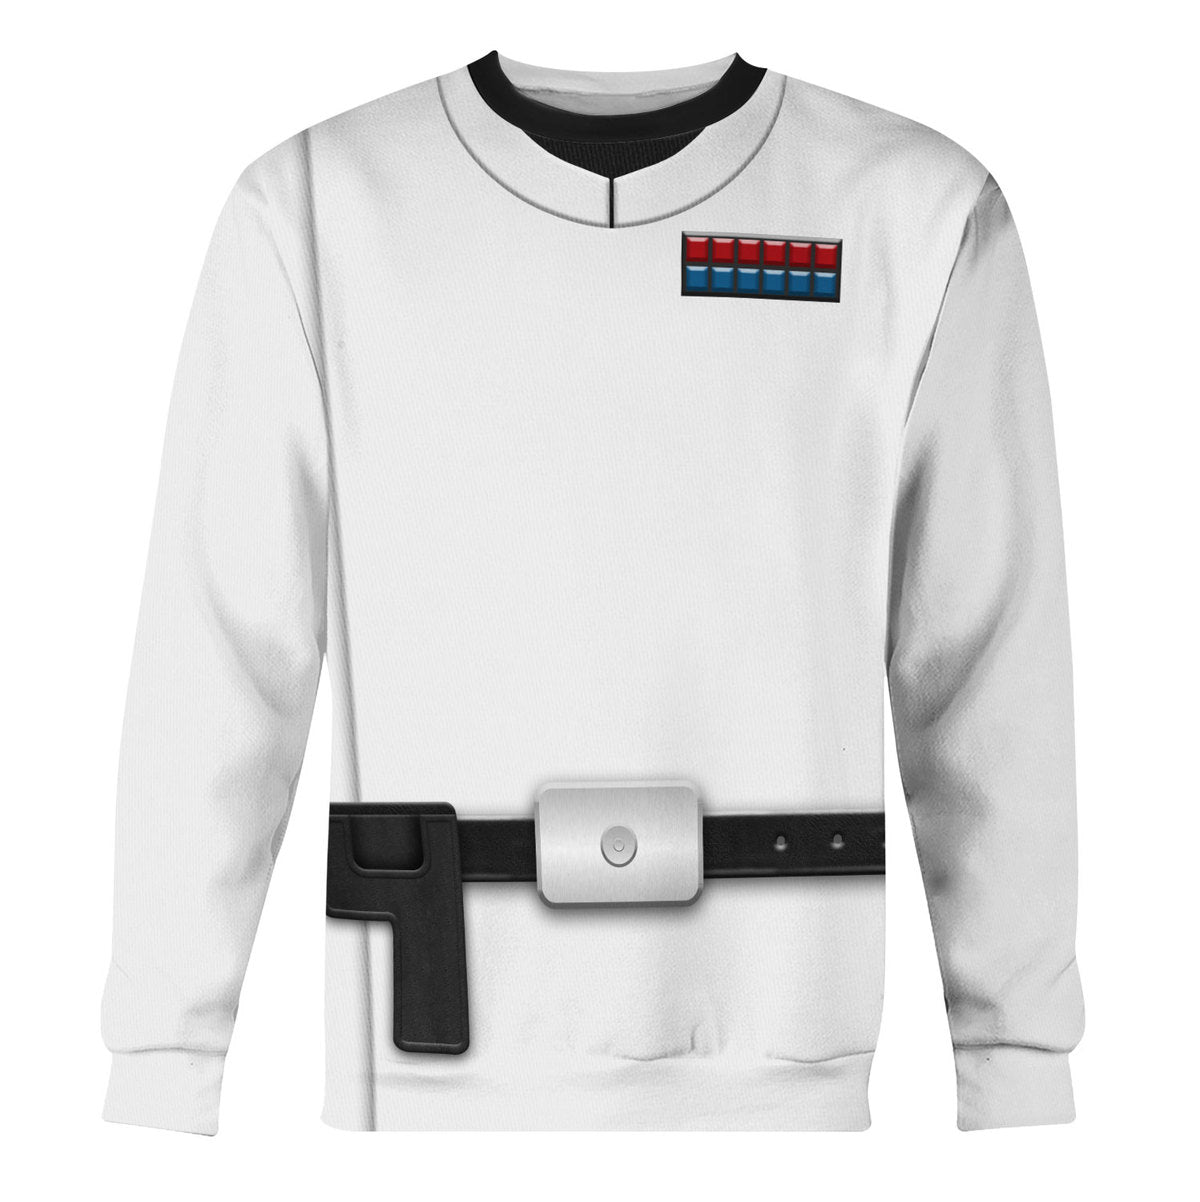 Star Wars Orson Krennic Costume - Sweater - Ugly Christmas Sweater